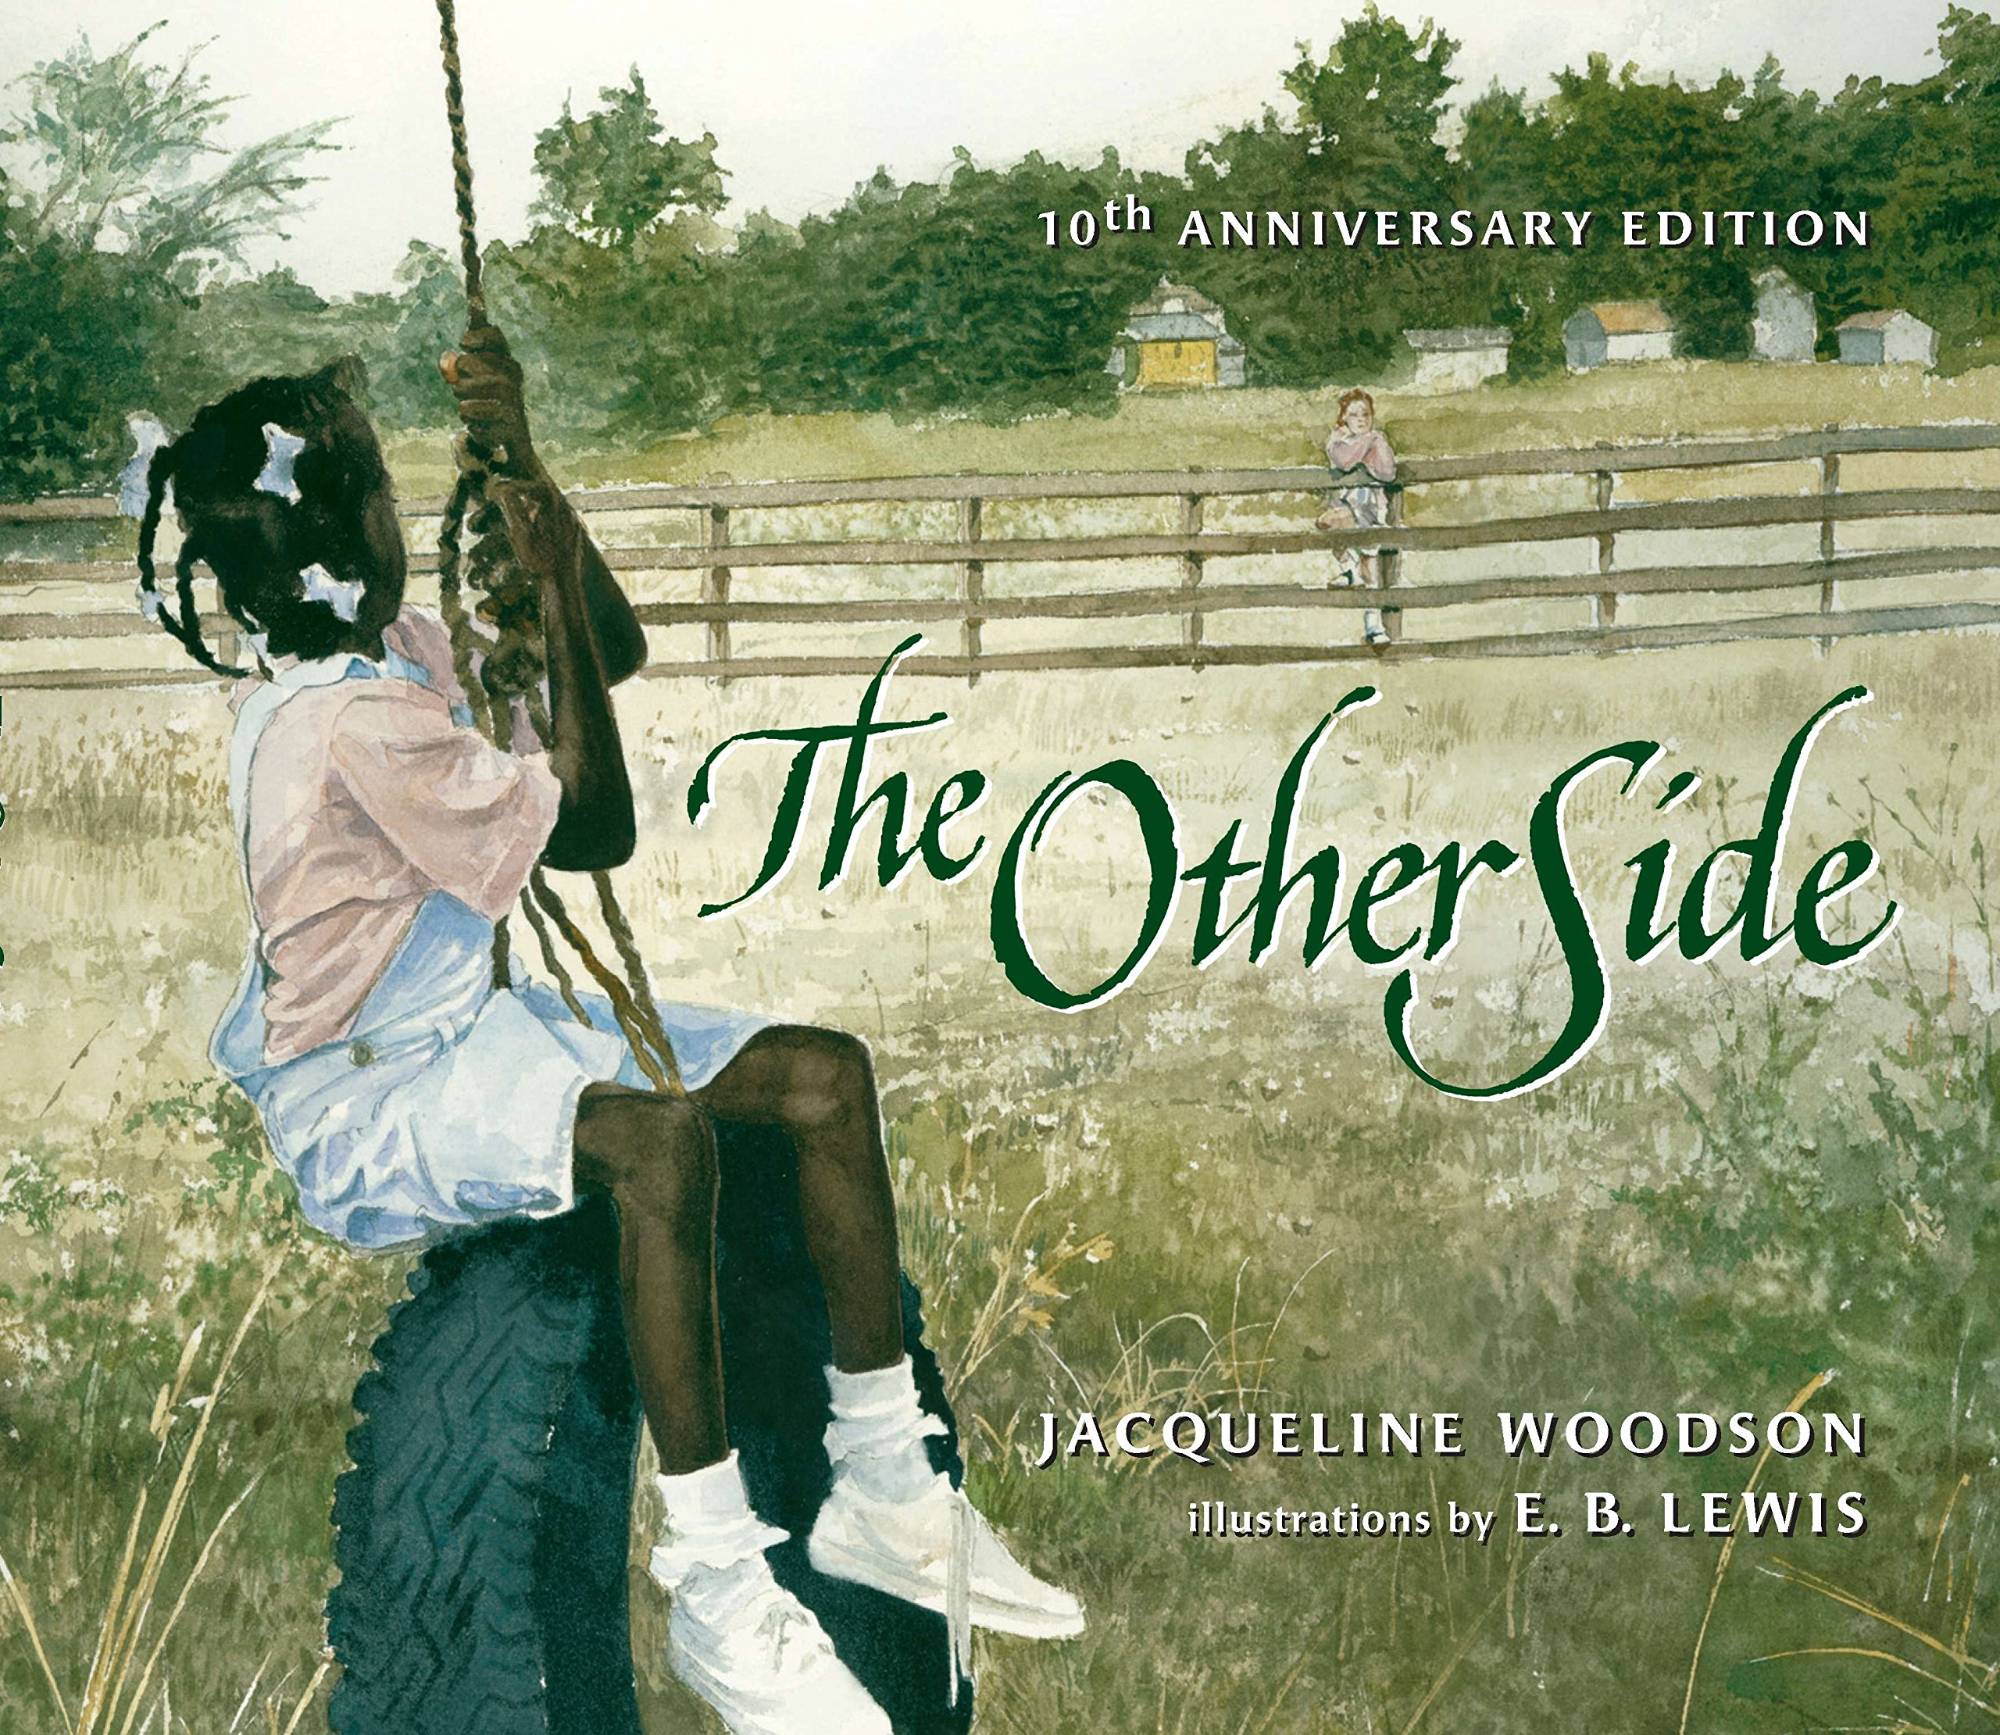 Book cover with illustration of a black child swinging on a tire swing